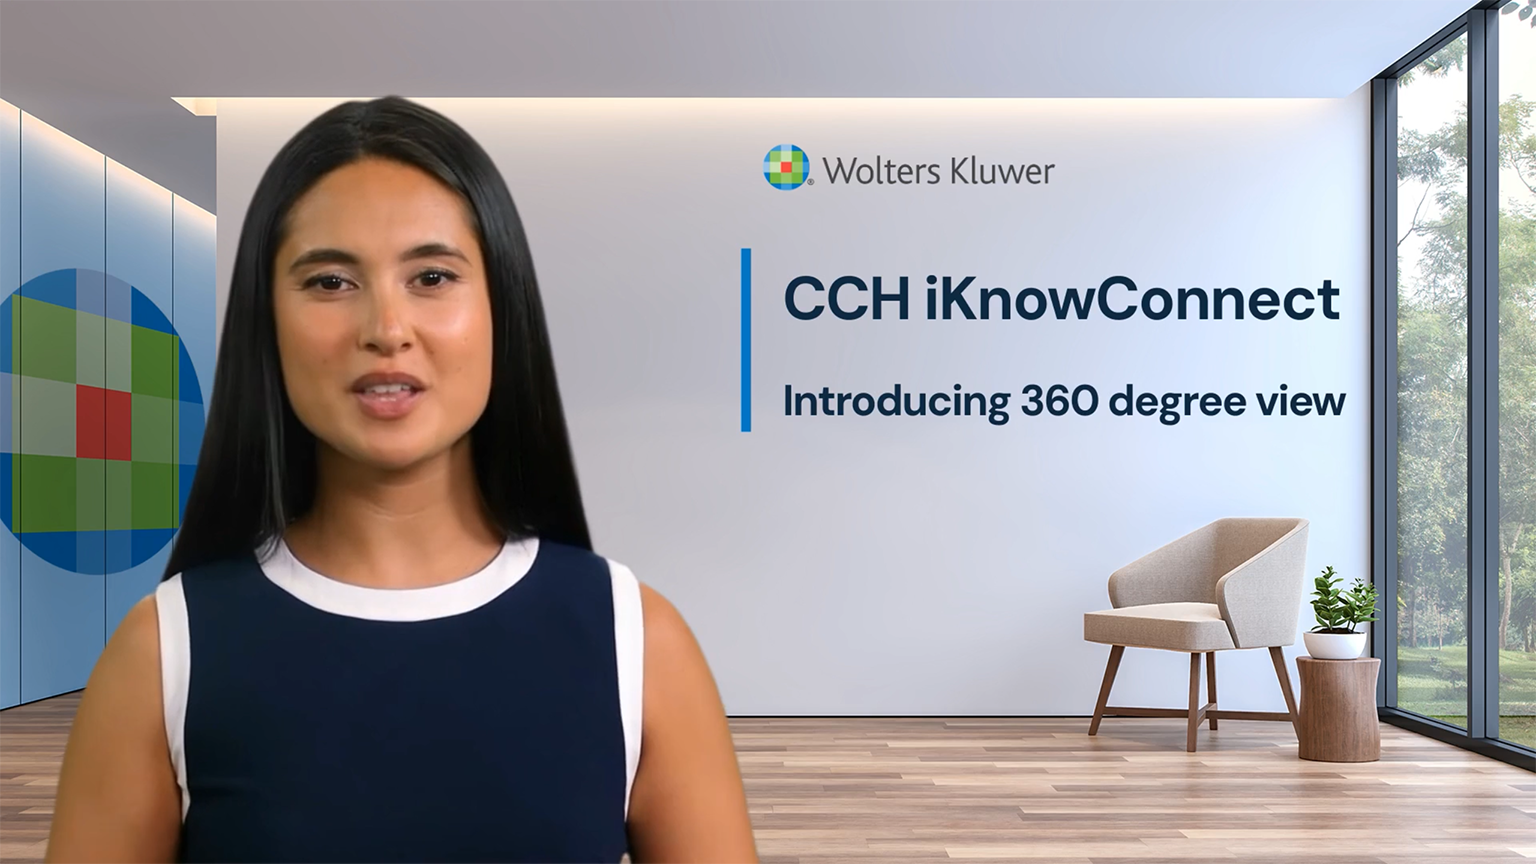 Screenshot of CCH iKnowConnect introducing 360-degree view video